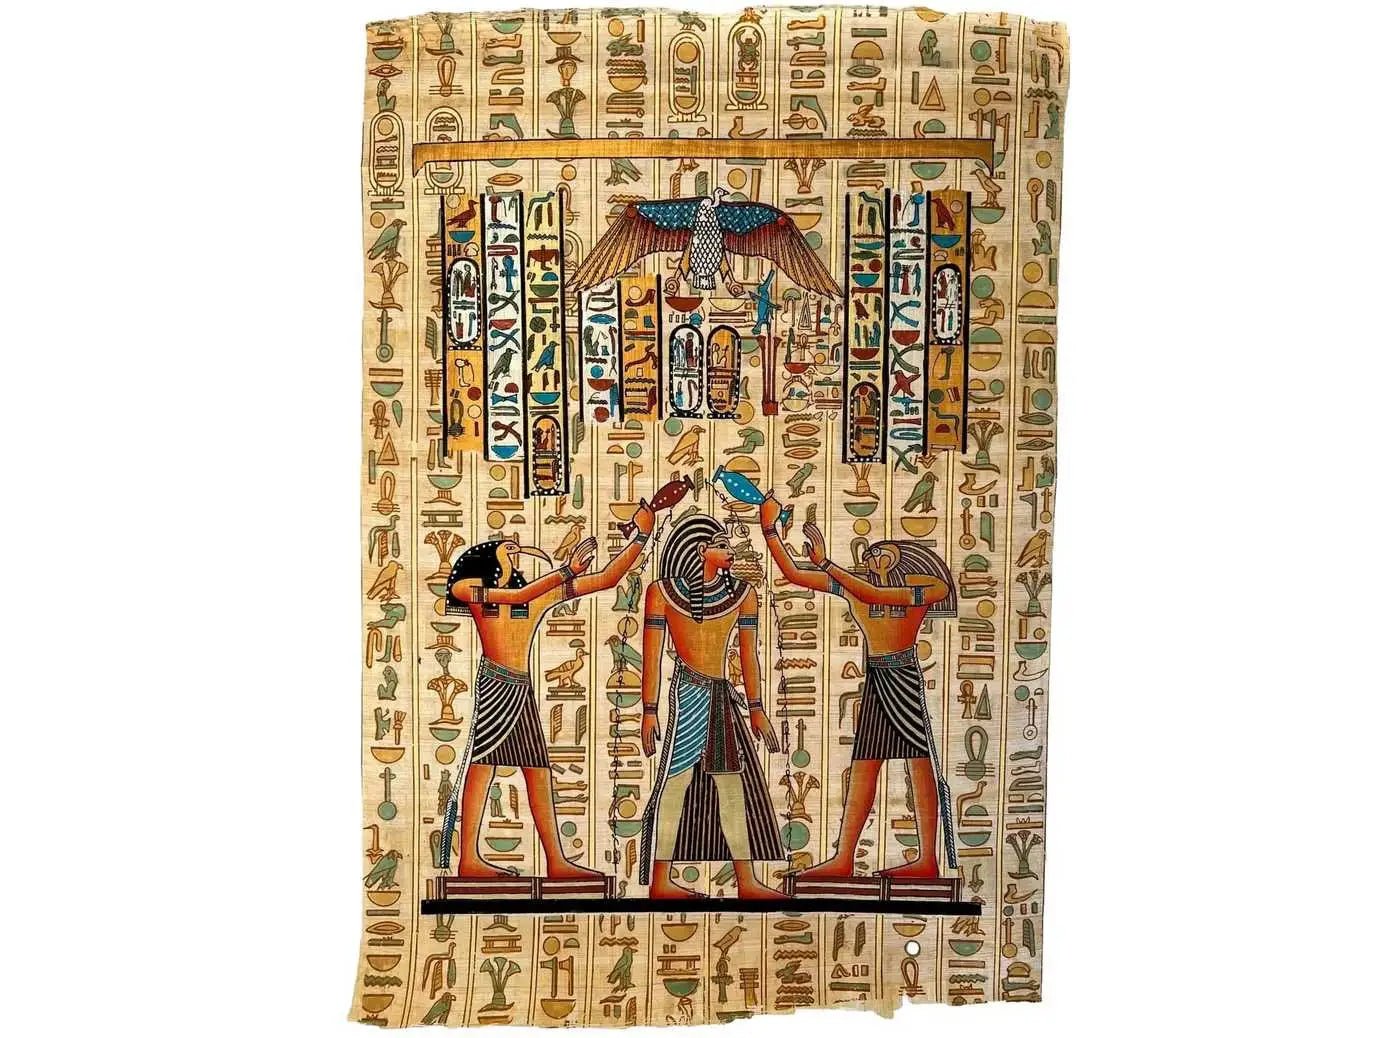 Ramses II Coronation - Thoth and Horus pouring life on Pharaoh - Egypt Papyrus Painting - Authentic Art of Ancient Egypt